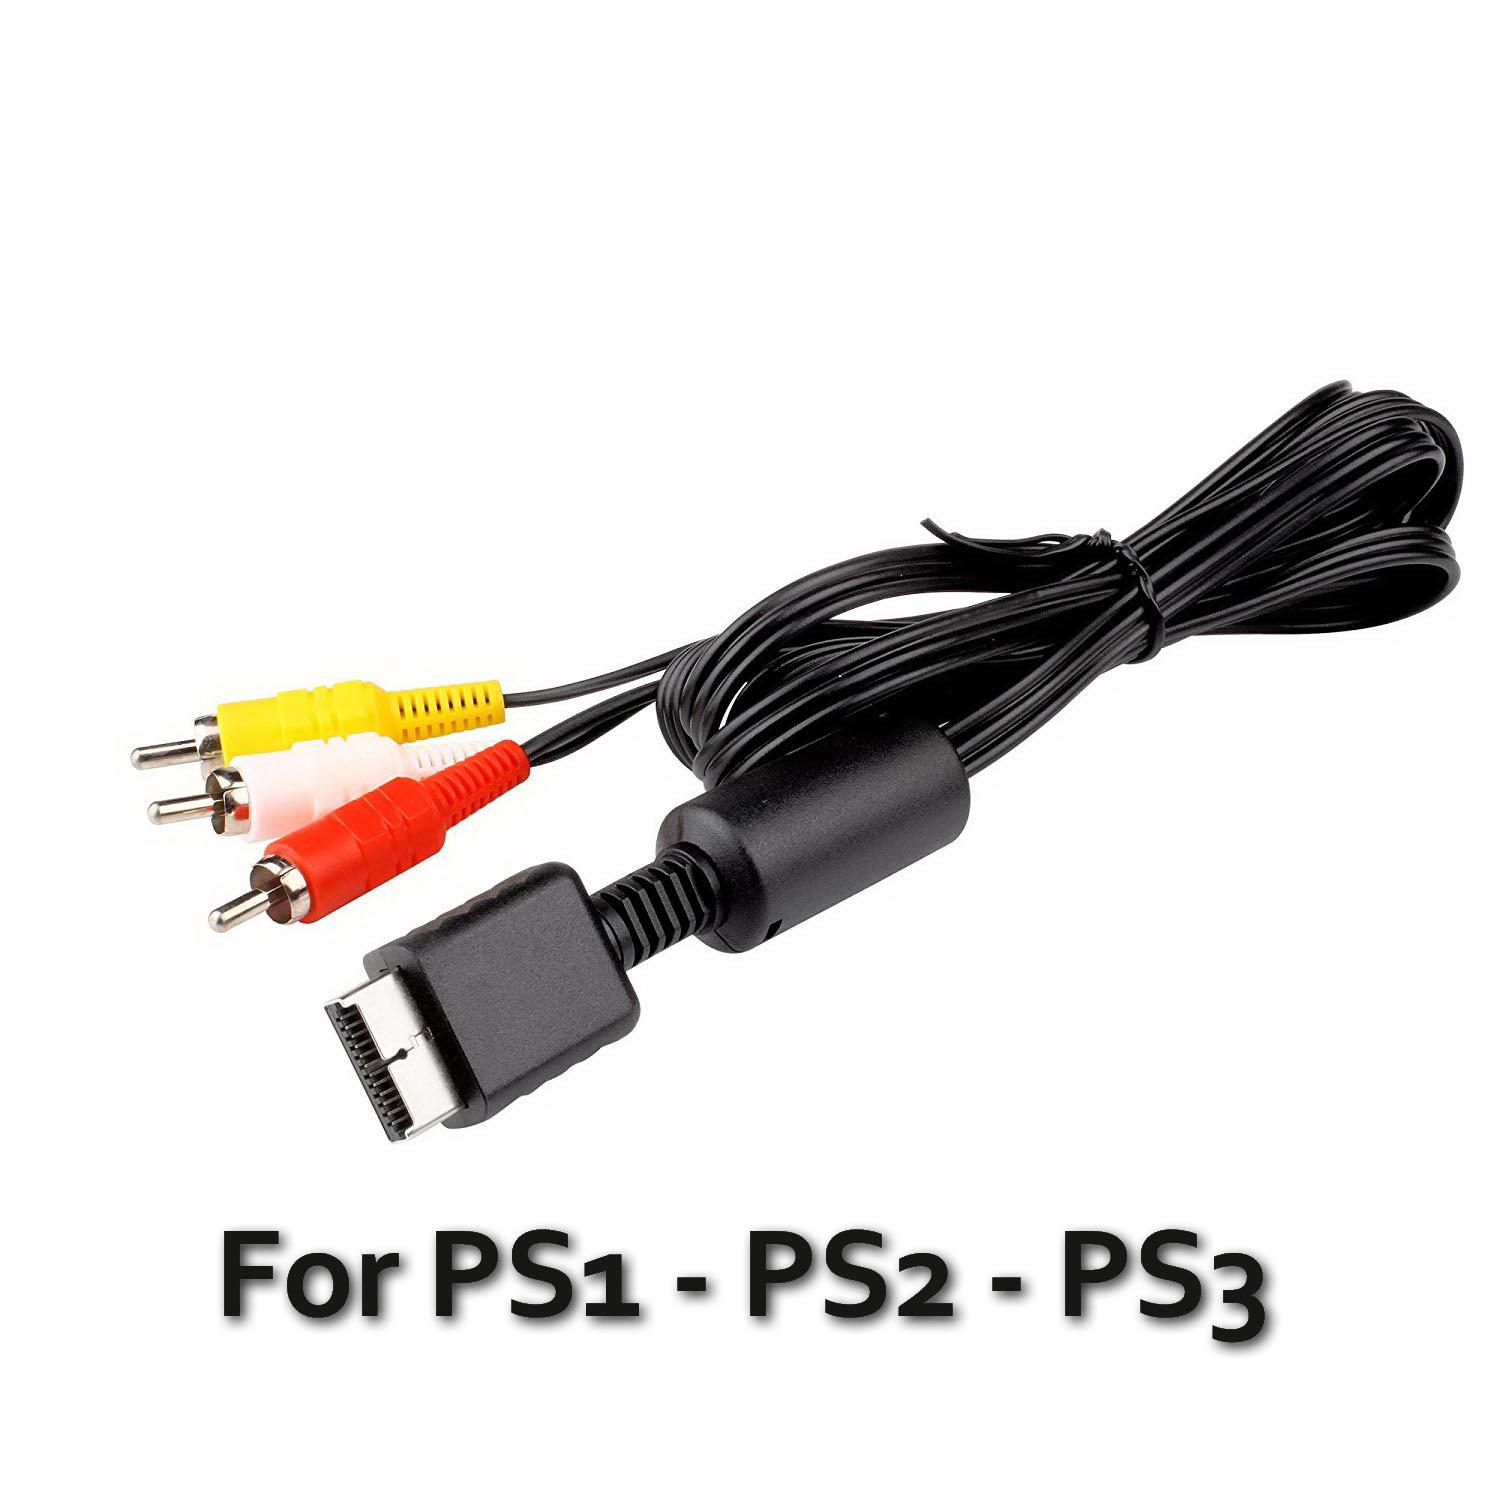 AV Audio/Video Cable for PS1 PS2 PS3 สายสัญญาณสำหรับเครื่อง PS1 PS2 PS3